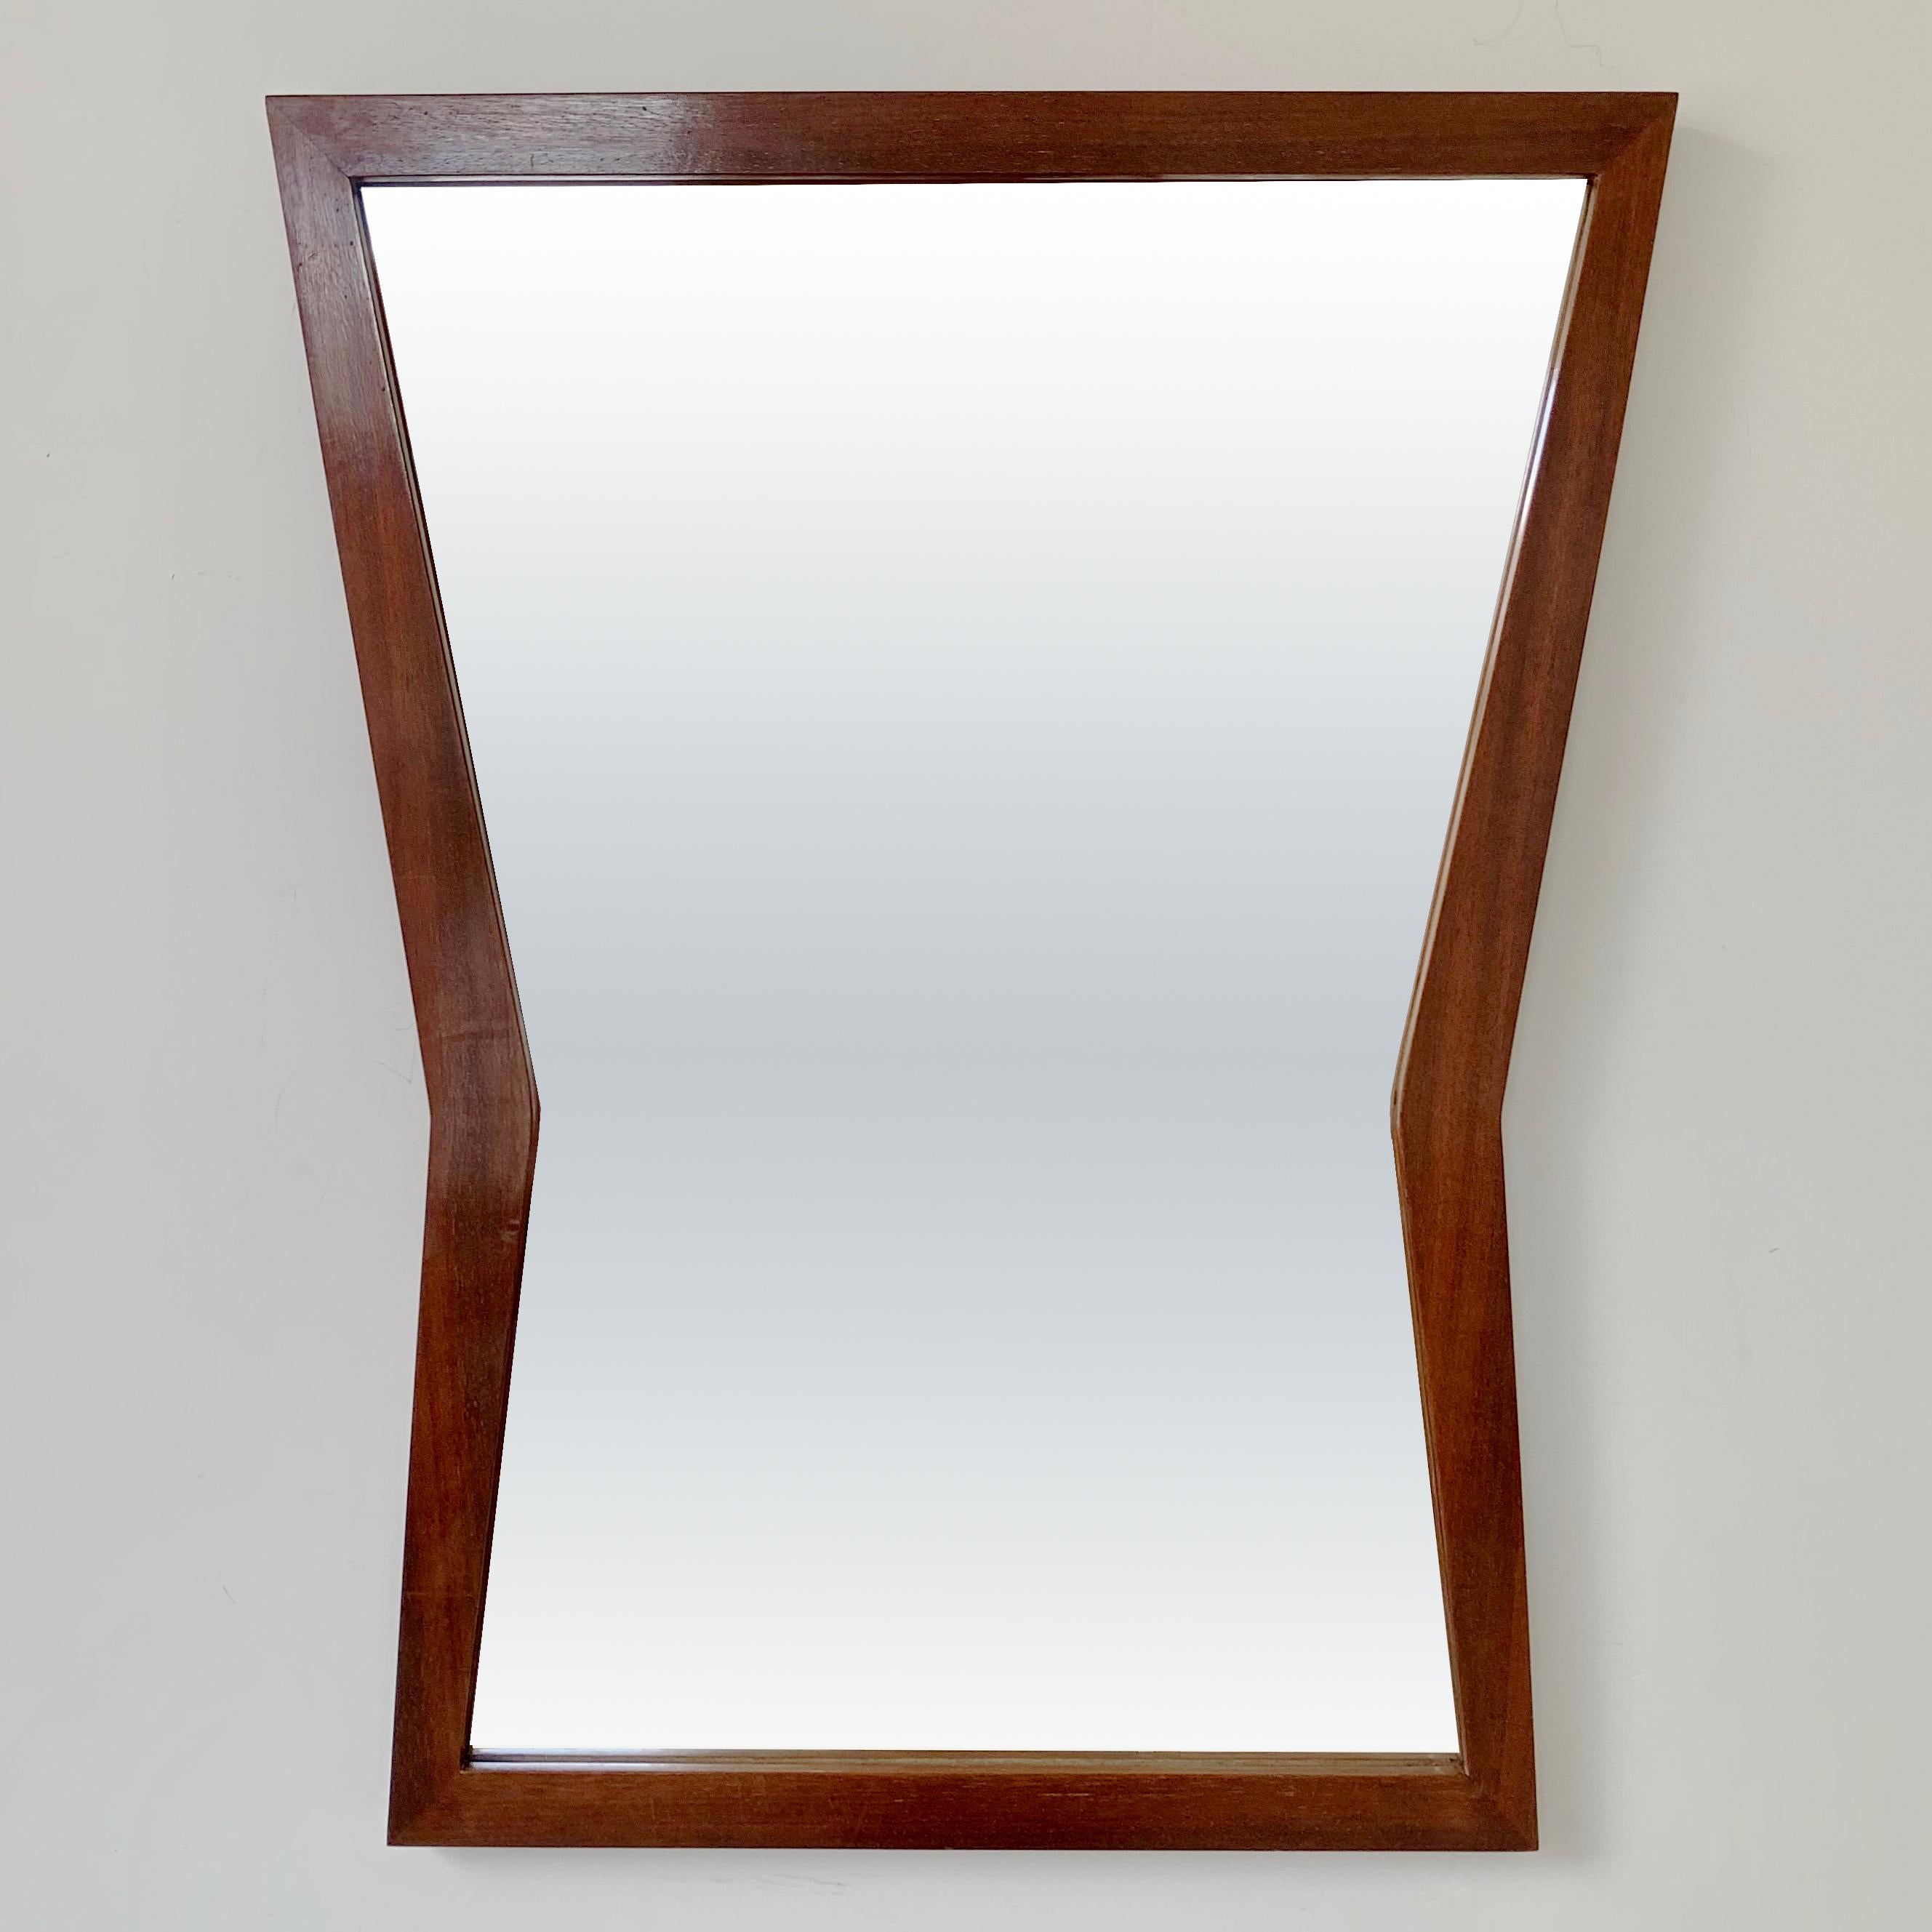 Very nice Mid-Century Modern wall mirror, circa 1960, Italy.
Geometrical frame, polished walnut.
Dimensions: 78 cm H, 62 cm W, 3 cm D.
Original condition.
All purchases are covered by our Buyer Protection Guarantee.
This item can be returned within